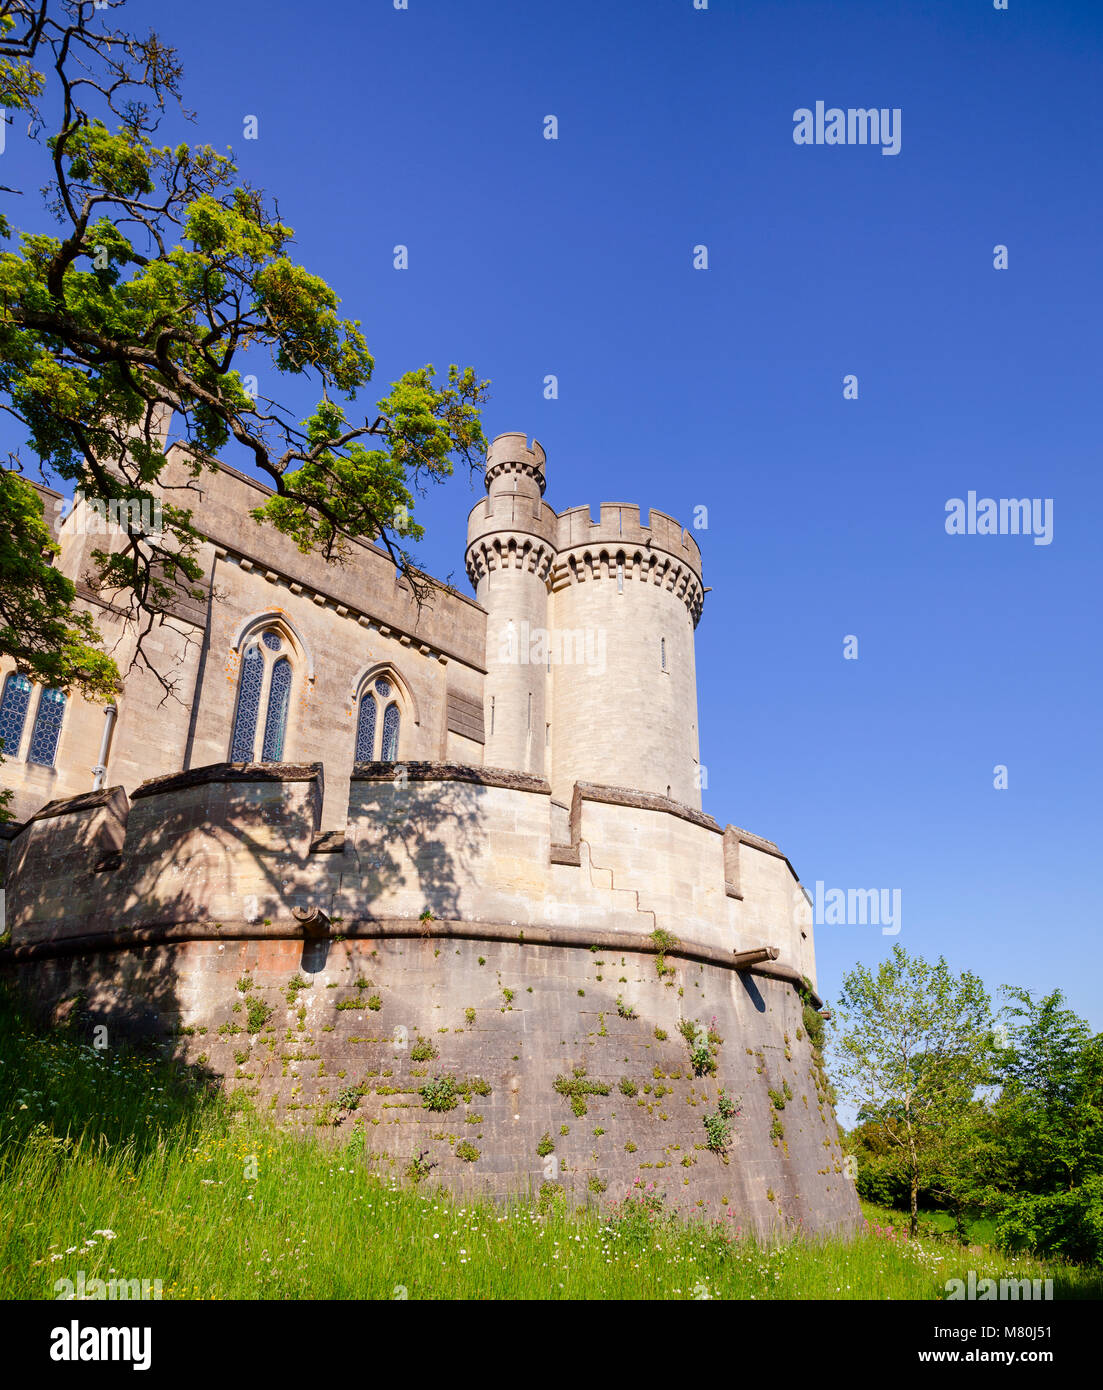 Restored and remodelled medieval motte-and-bailey castle in Arundel, West Sussex, South East England, UK. A popular tourist attraction. Stock Photo